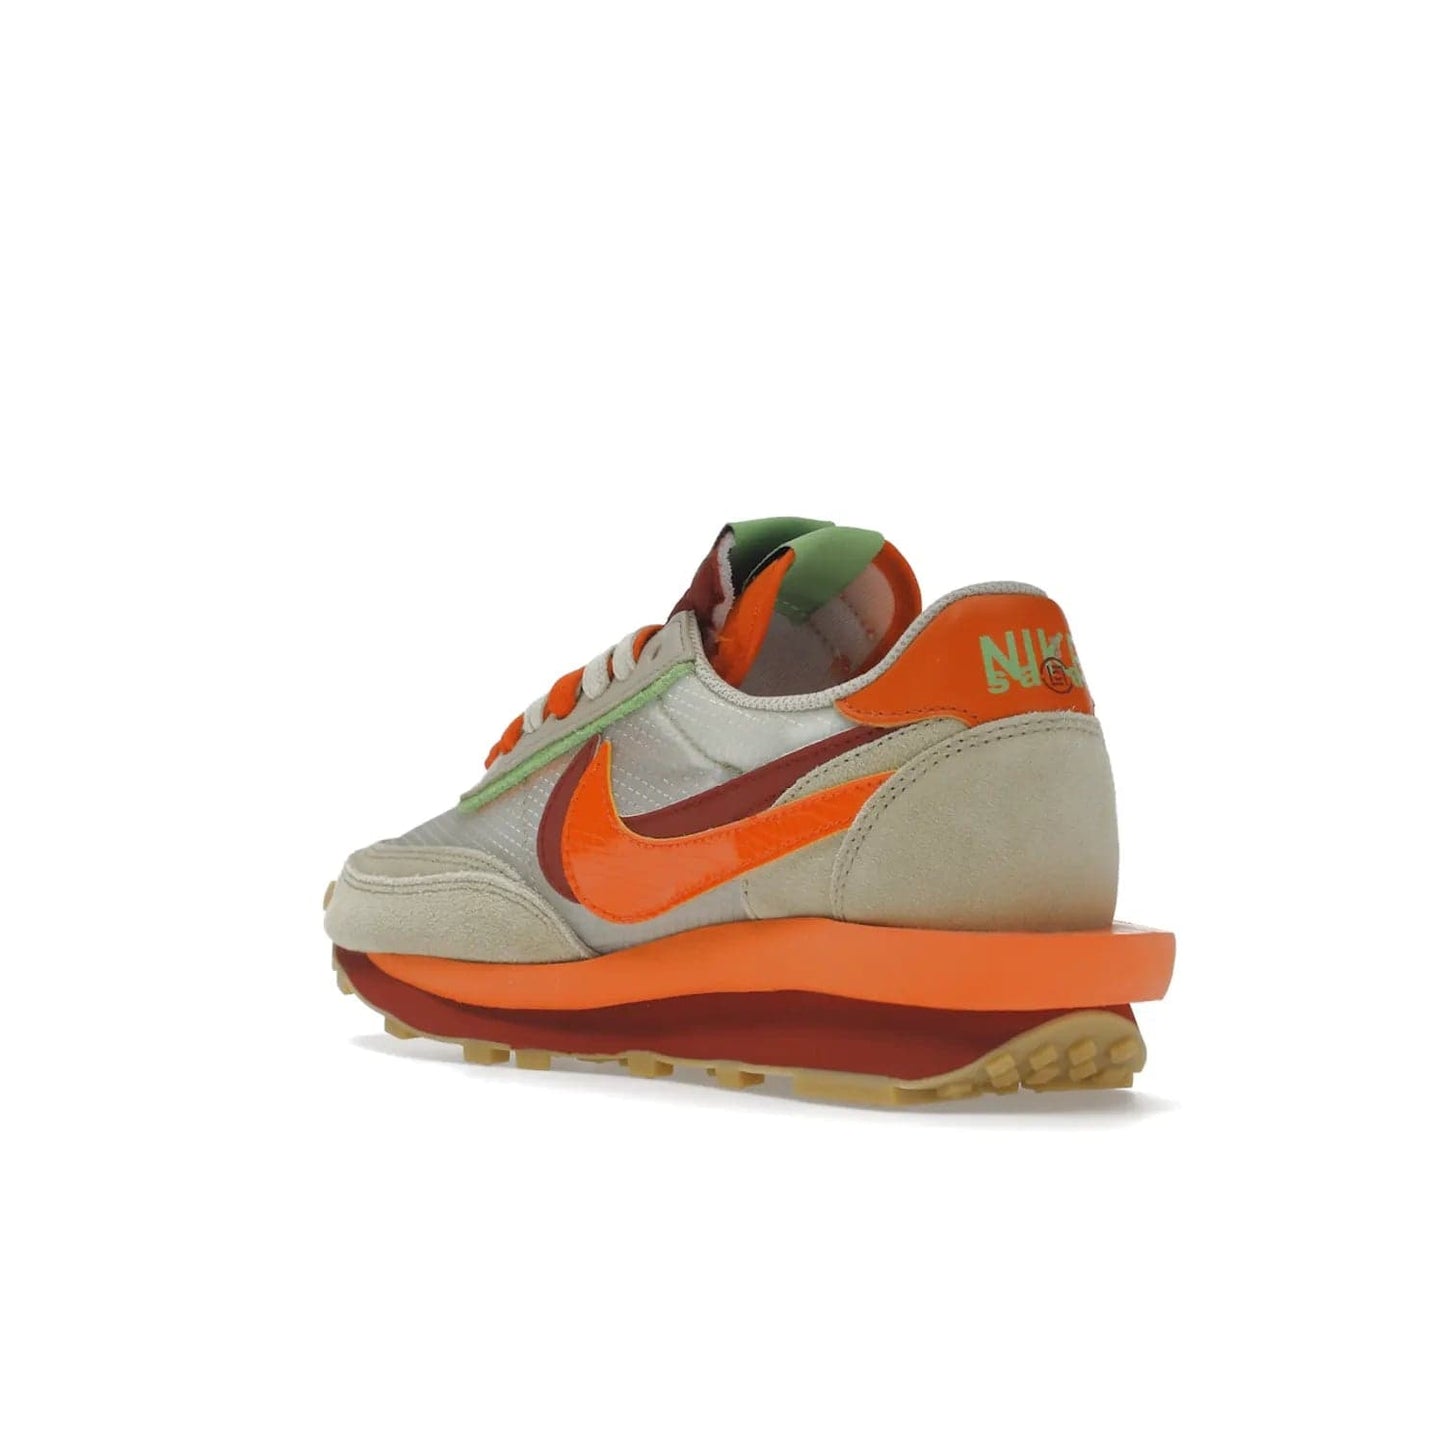 Nike LD Waffle sacai CLOT Kiss of Death Net Orange Blaze - Image 24 - Only at www.BallersClubKickz.com - A bold and stylish Nike LD Waffle sacai CLOT Kiss of Death Net Orange Blaze sneaker featuring a unique off-white, Deep Red & Orange Blaze Swooshes, two-toned stacked sole and doubled tongue. Available in September 2021. Make a statement.